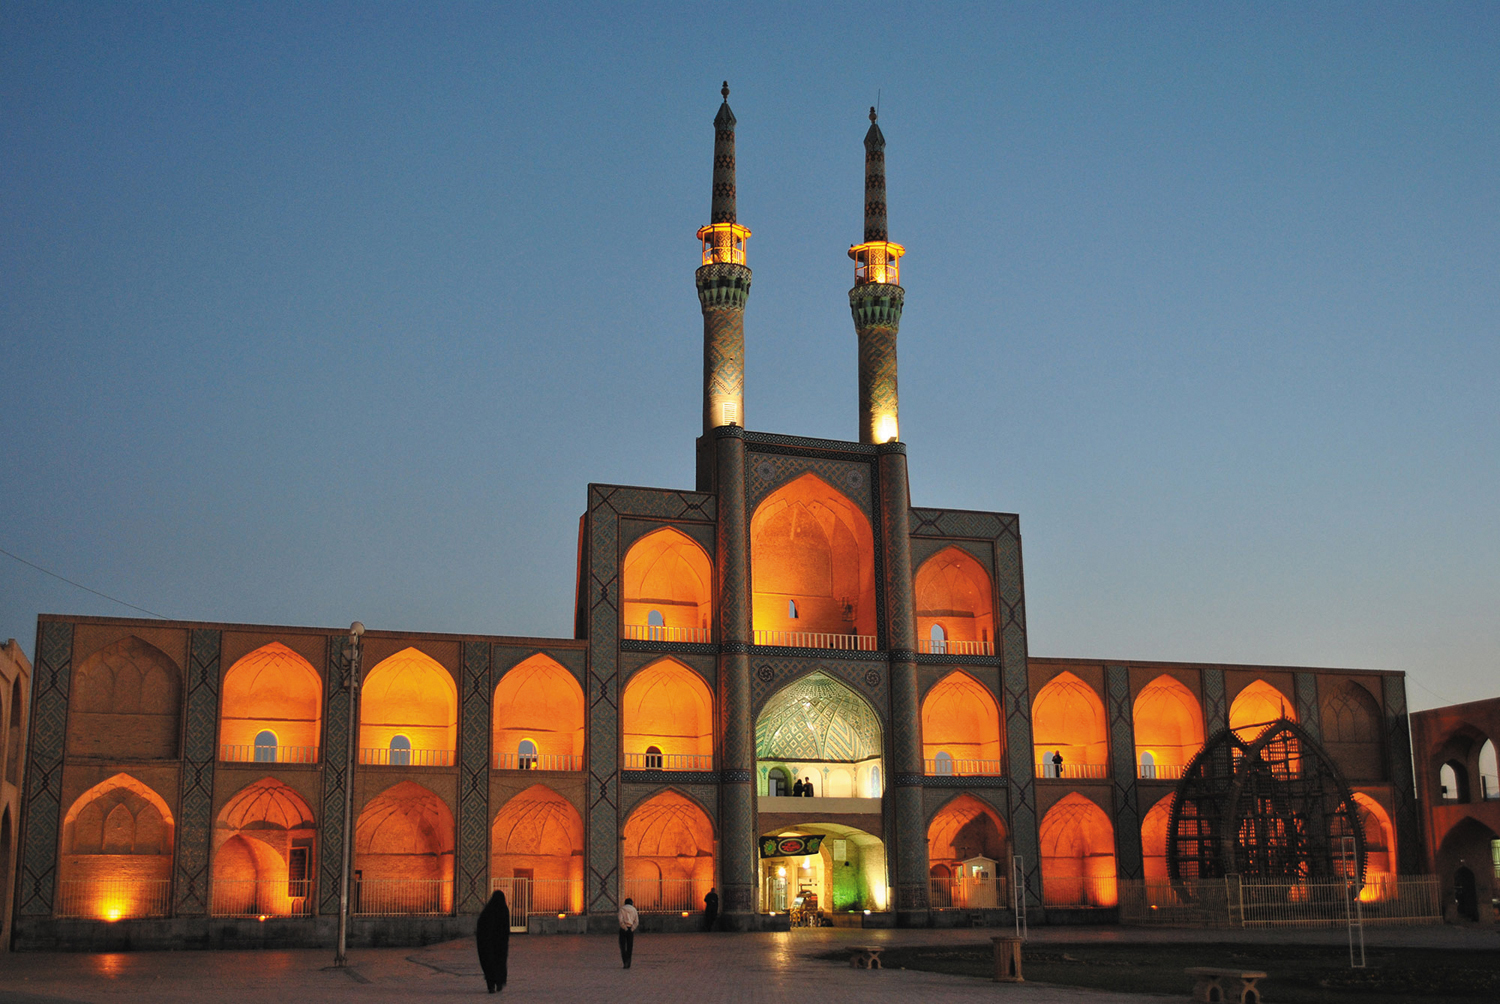 While some tour operators are saying travel to Iran is business as usual, others are postponing and canceling upcoming itineraries to the country. (Photo credit: Intrepid Travel)